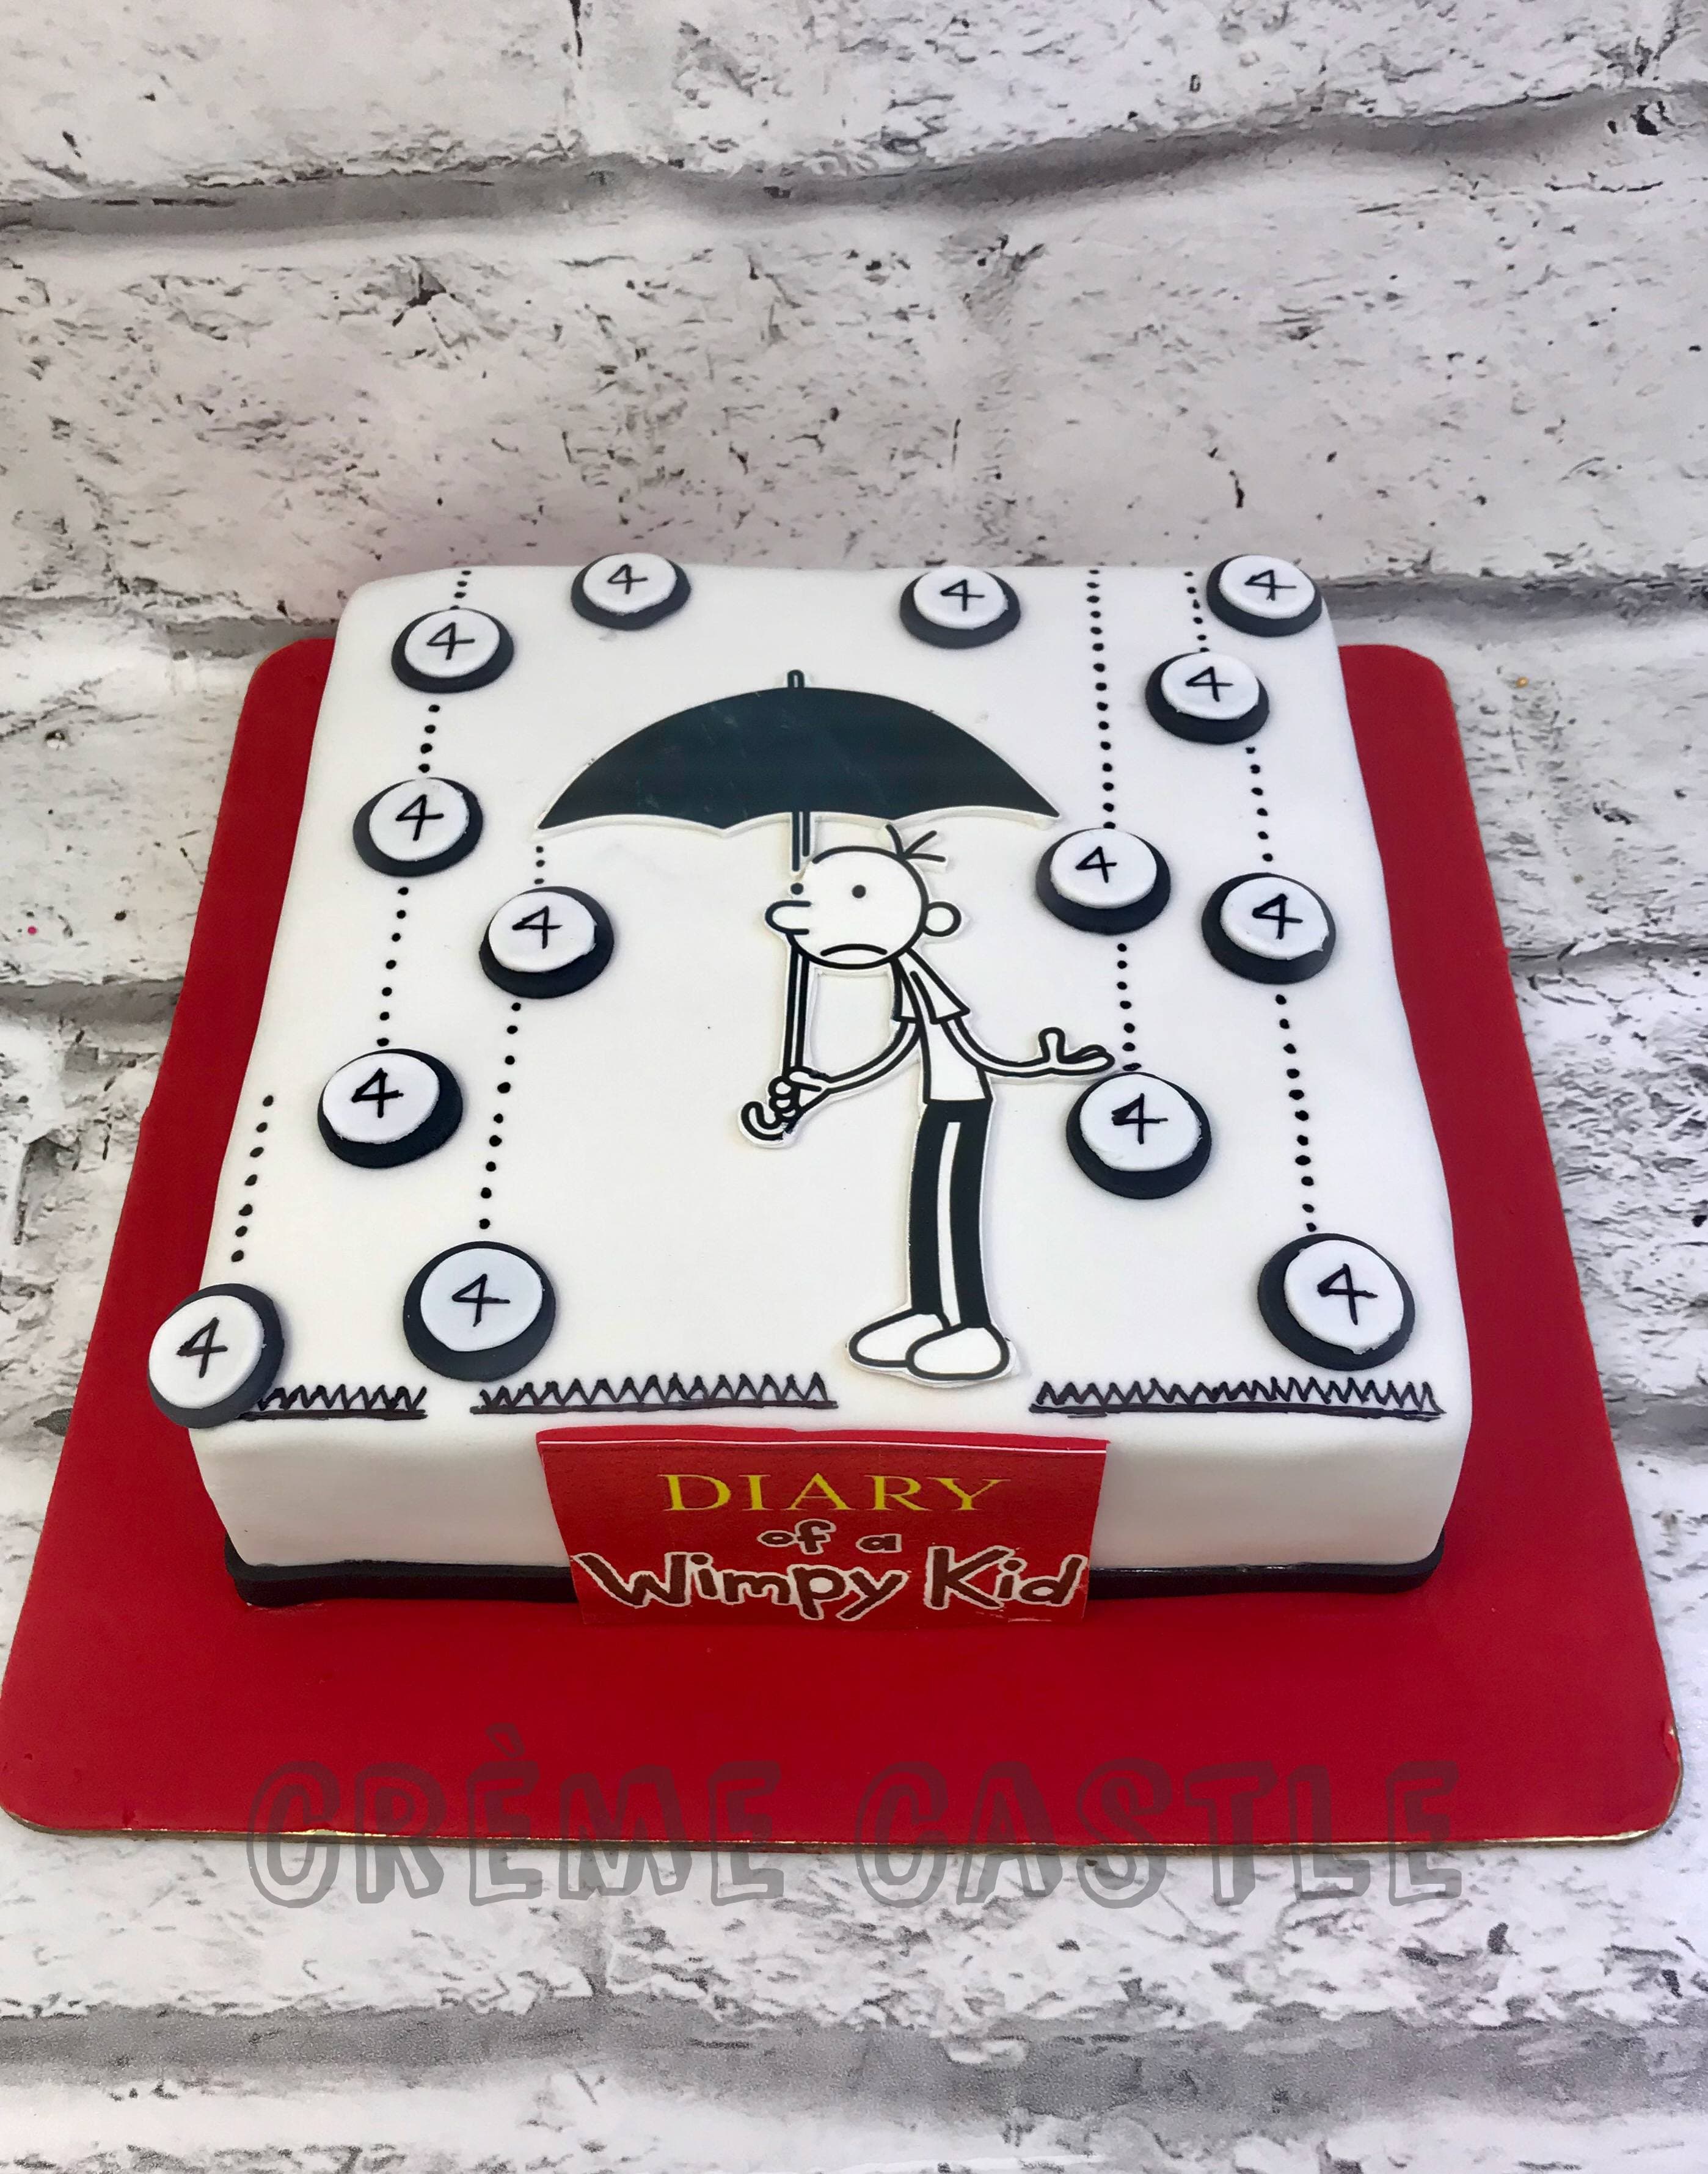 DIARY OF A WIMPY KID CAKE